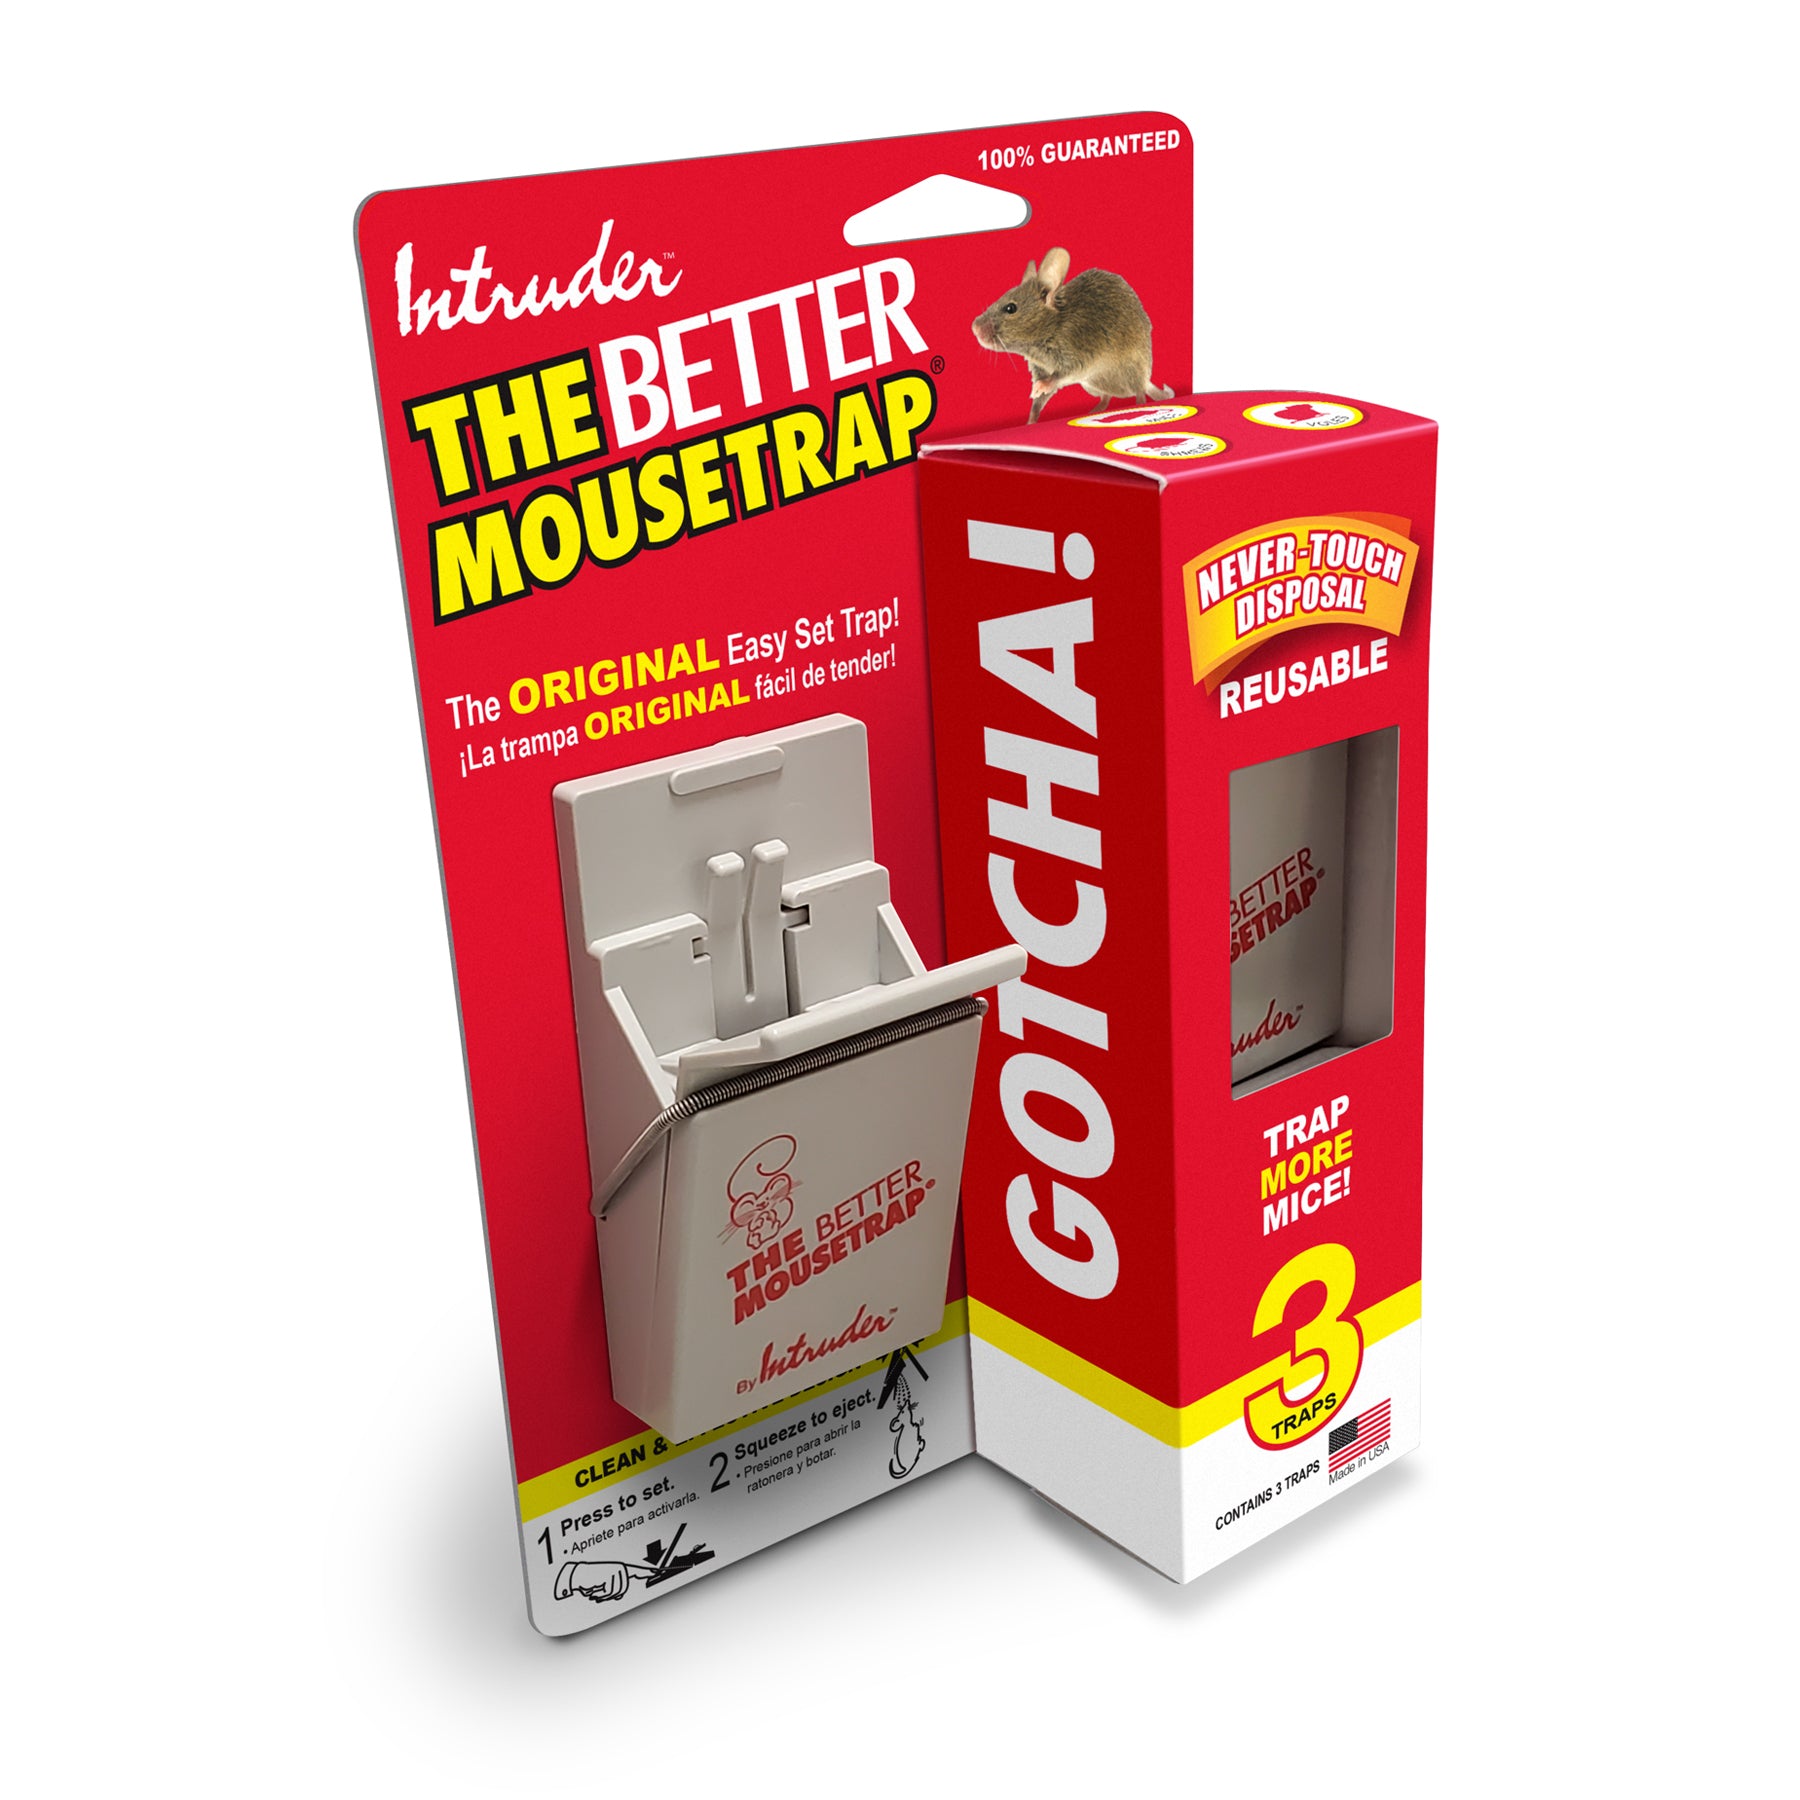 The Better Mousetrap Intruder Snap Trap For Mice 2-Pack.